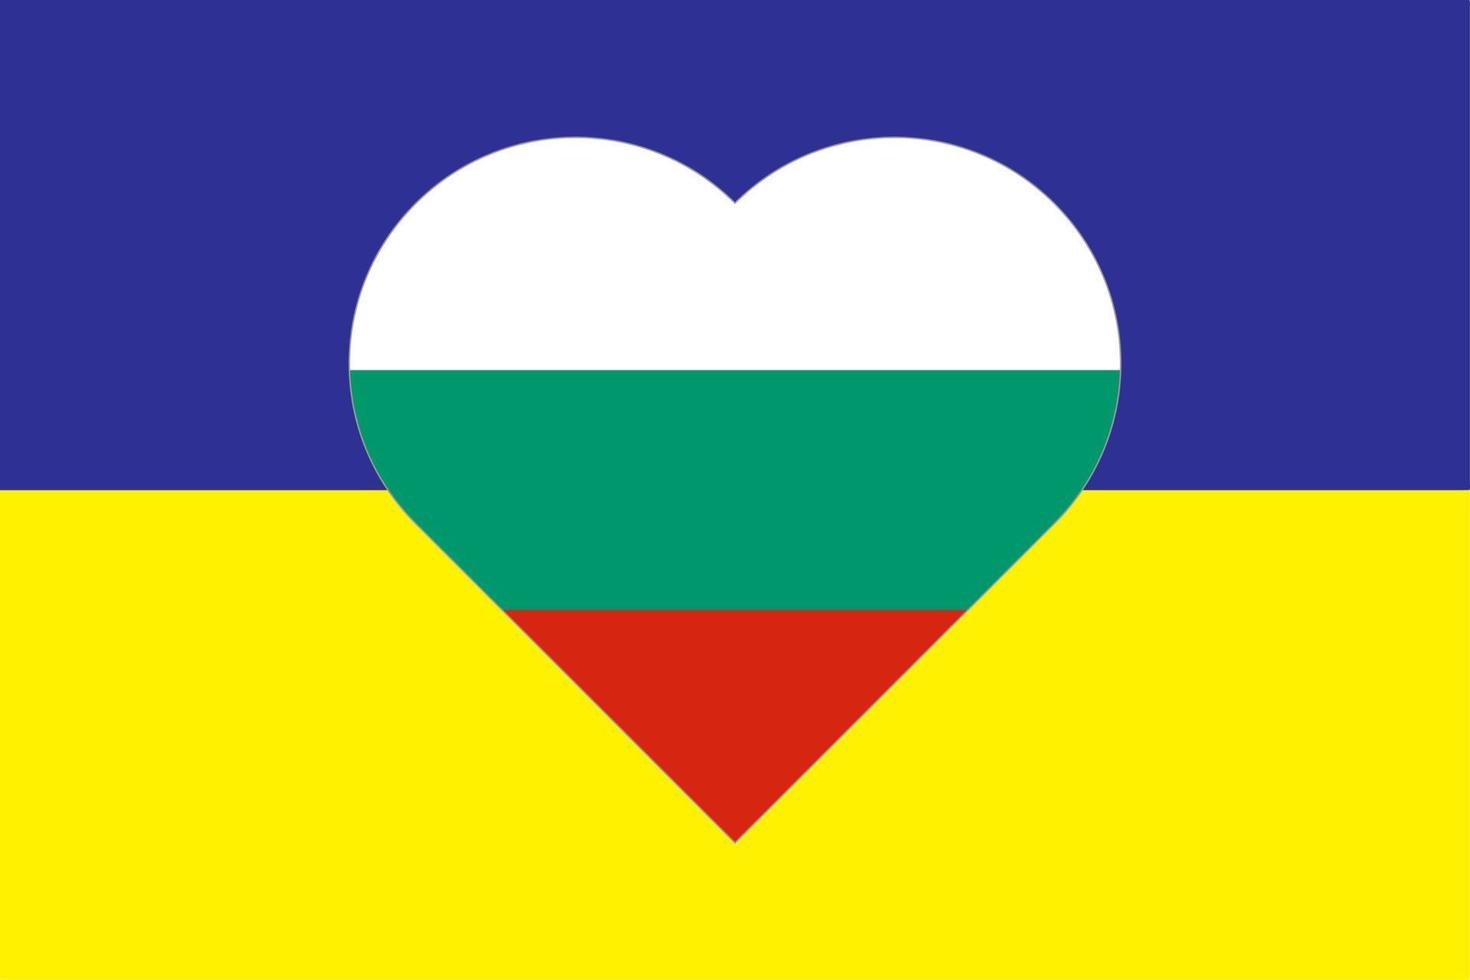 Heart painted in the colors of the flag of Bulgaria on the flag of Ukraine. Vector illustration of a heart with the national symbol of Bulgaria on a blue-yellow background.